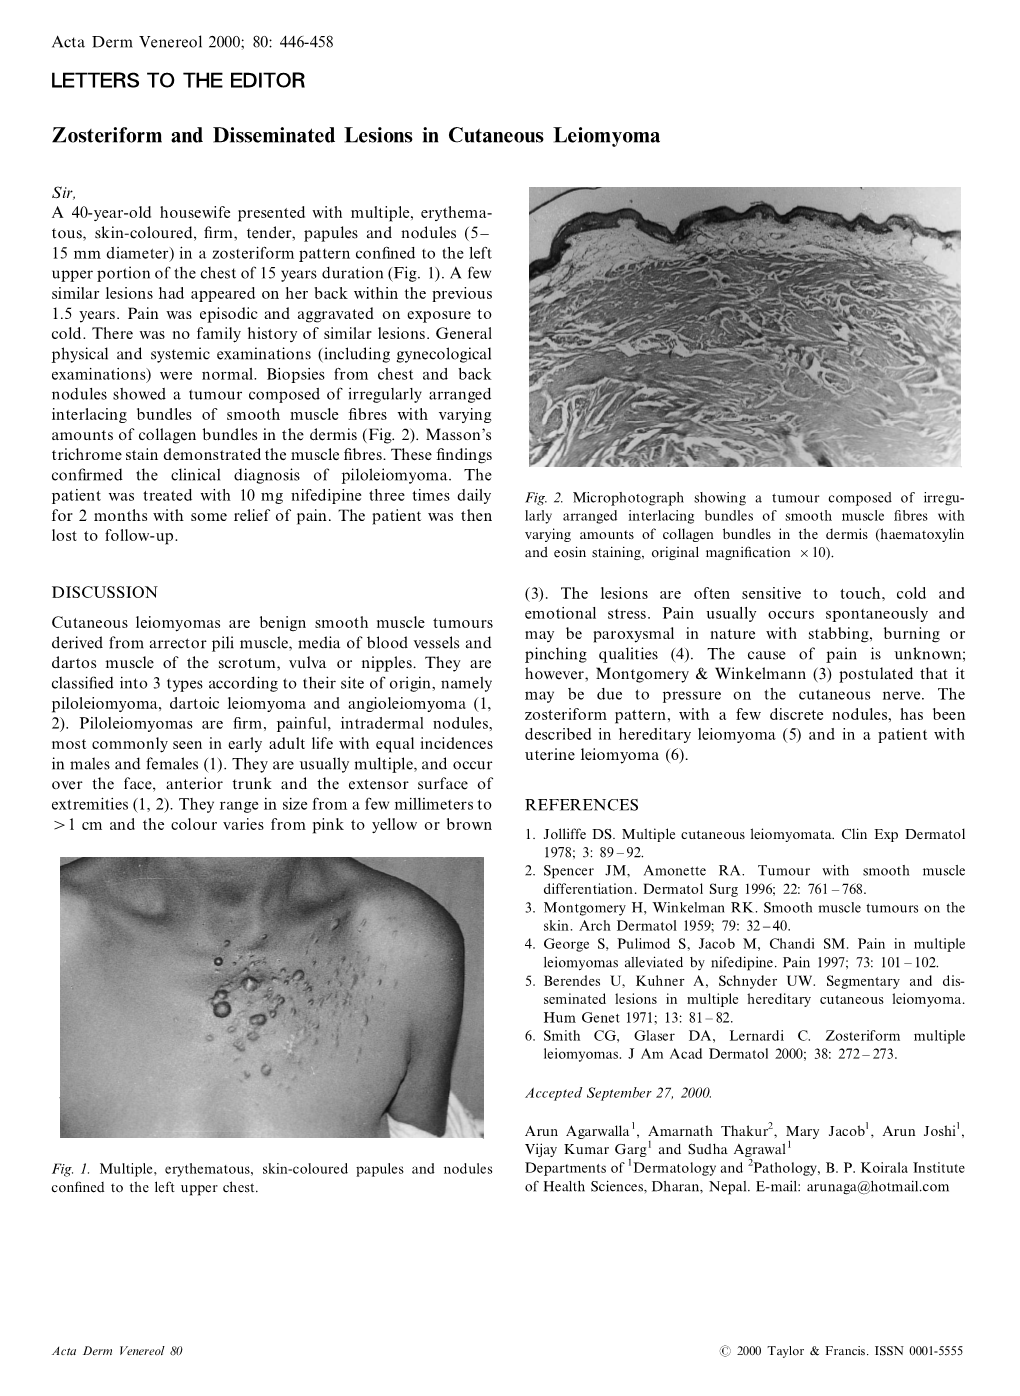 Zosteriform and Disseminated Lesions in Cutaneous Leiomyoma